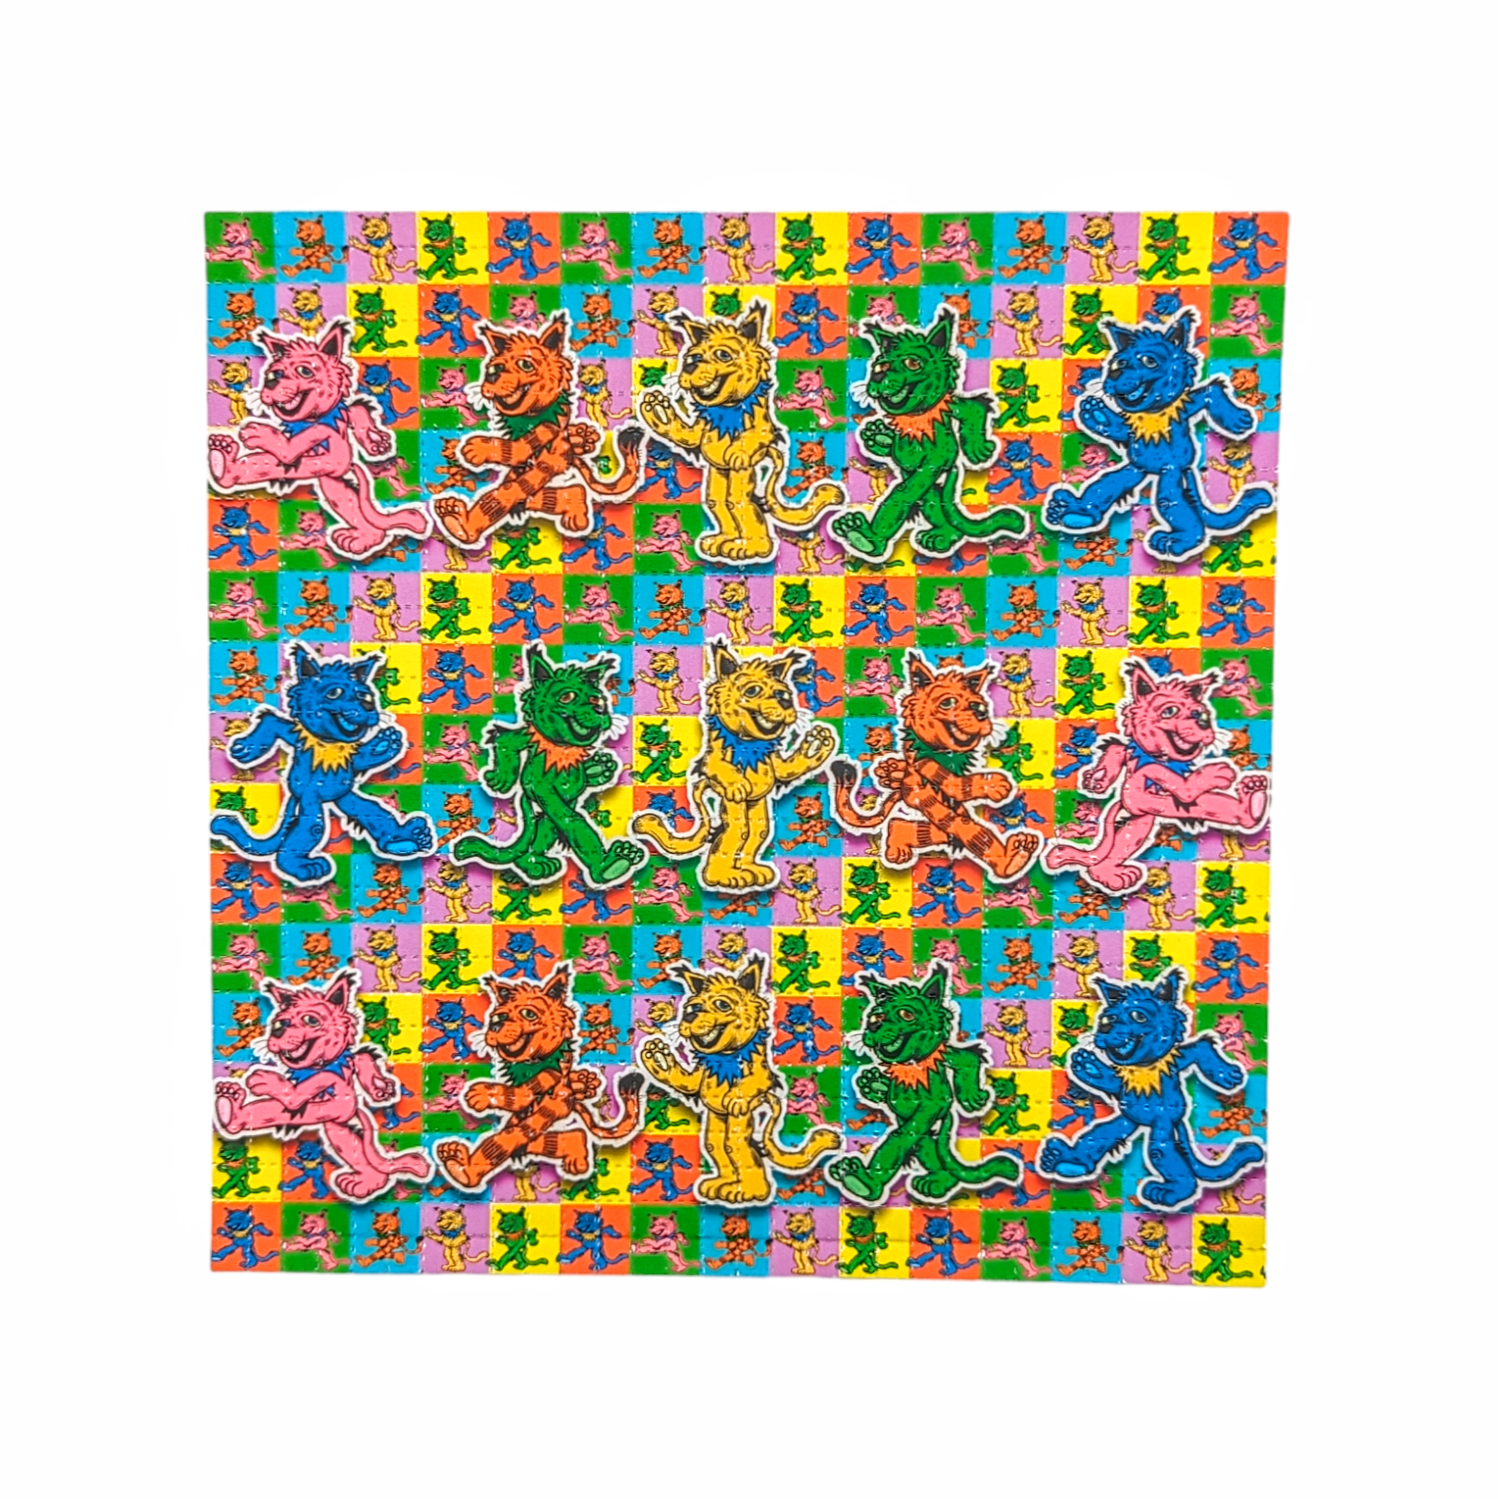 Vincent Gordon  Marching Cats, 2024 Archival Pigment Print on Perforated Blotter Paper 7.75 x 7.75 in Edition of 100  Hand Signed + Numbered by the artist. Perforated and published by Zane Kesey in Pleasant Hill, OR.